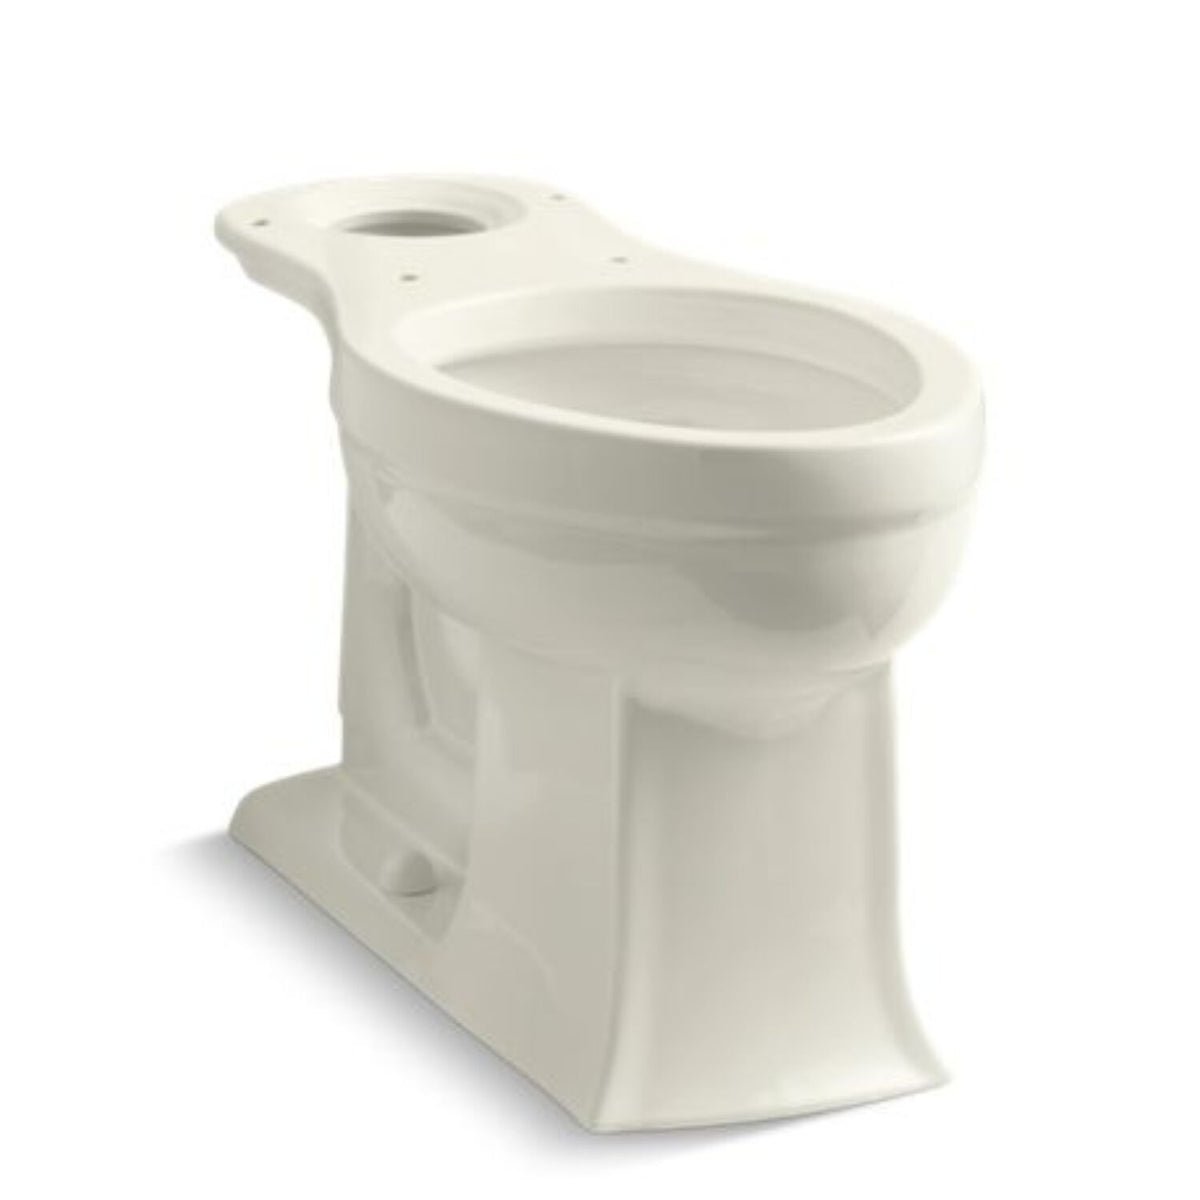 ARCHER TWO-PIECE ELONGATED COMFORT HEIGHT TOILET BOWL ONLY